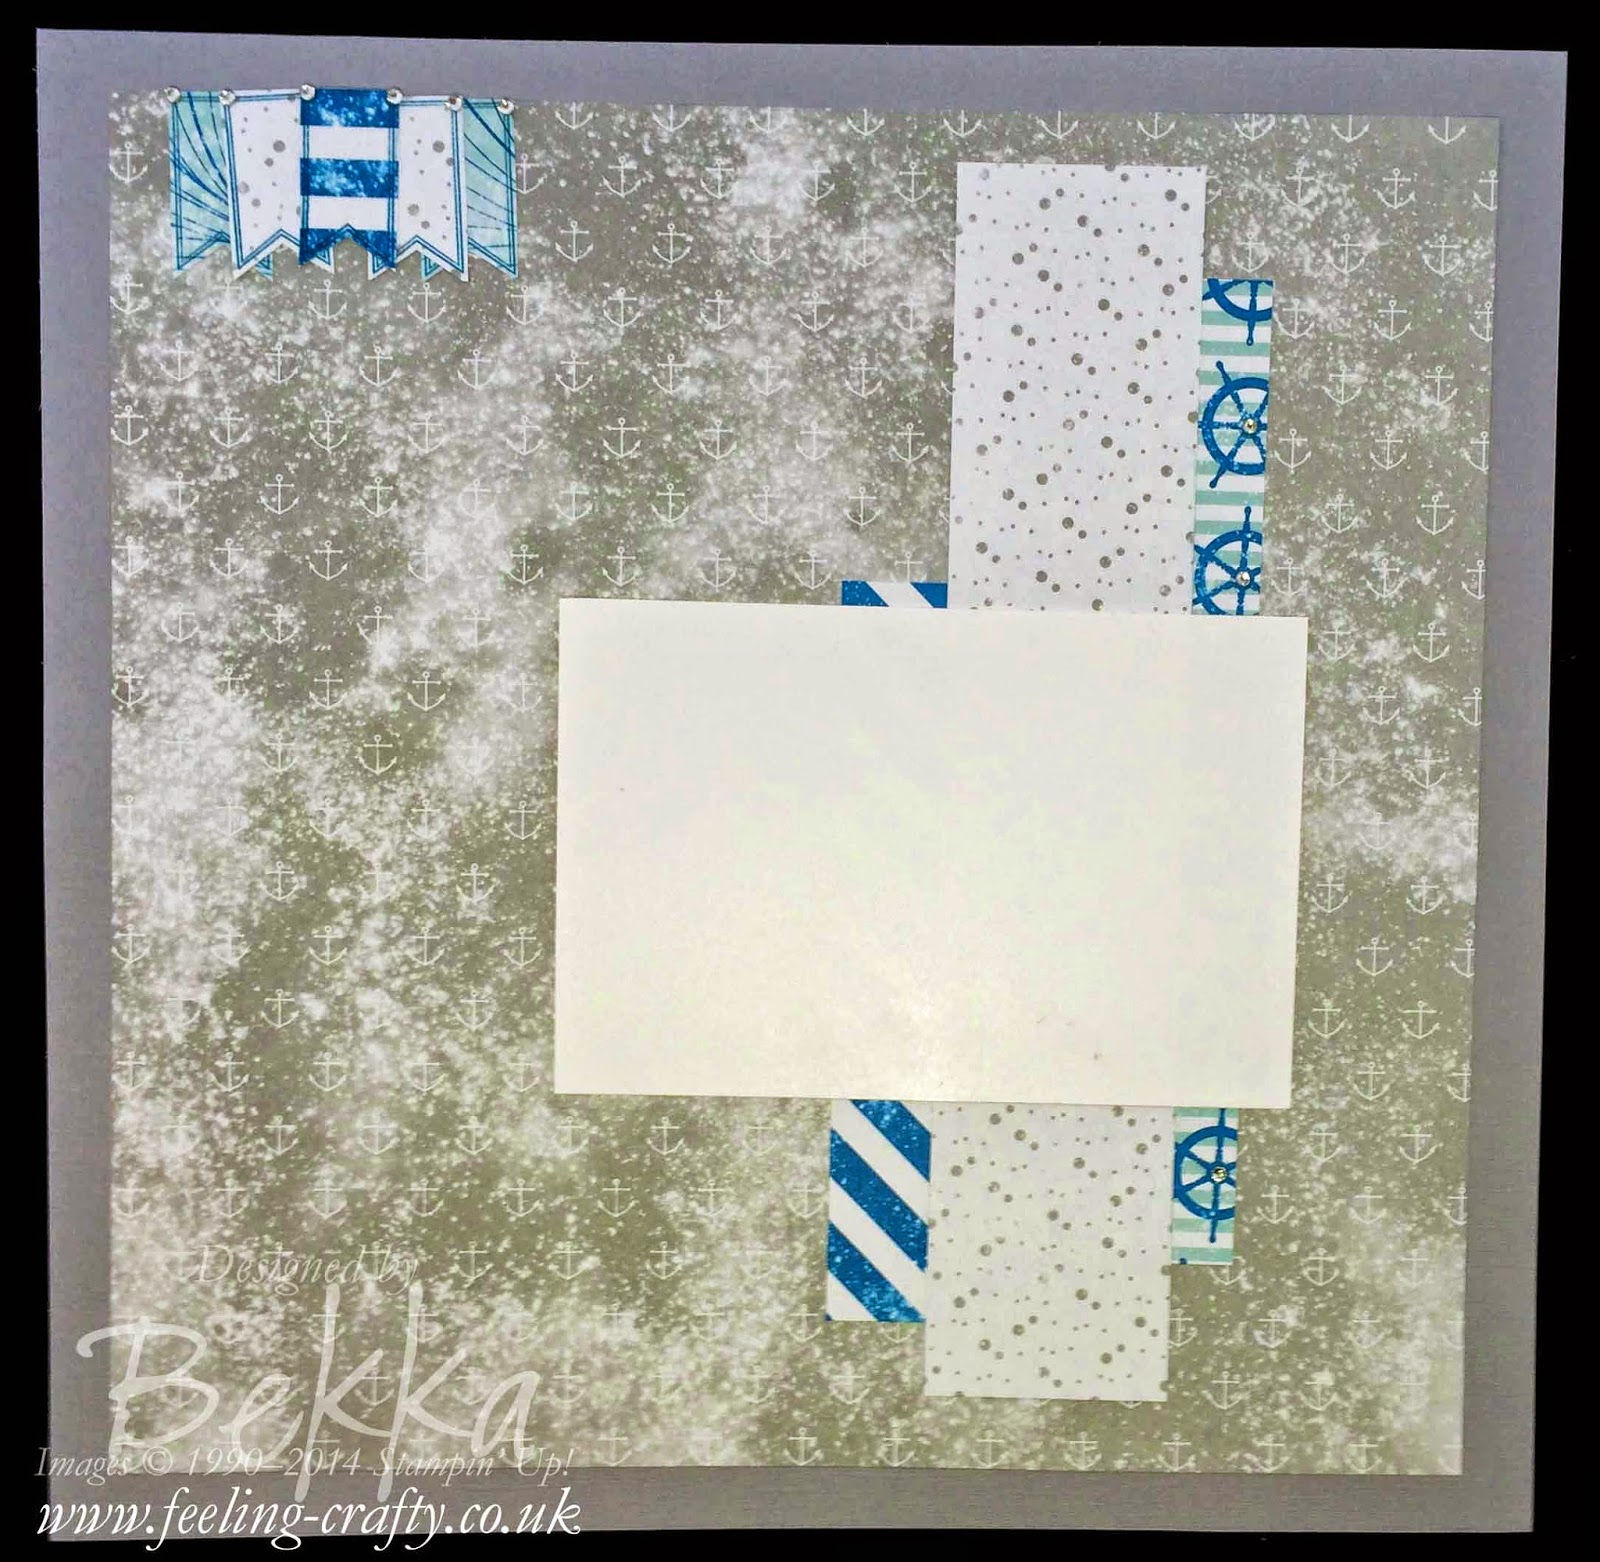 Scrapbook Page featuring the High Tides Stampin' Up! Papers - check this blog every Saturday for great Scrapbooking Ideas